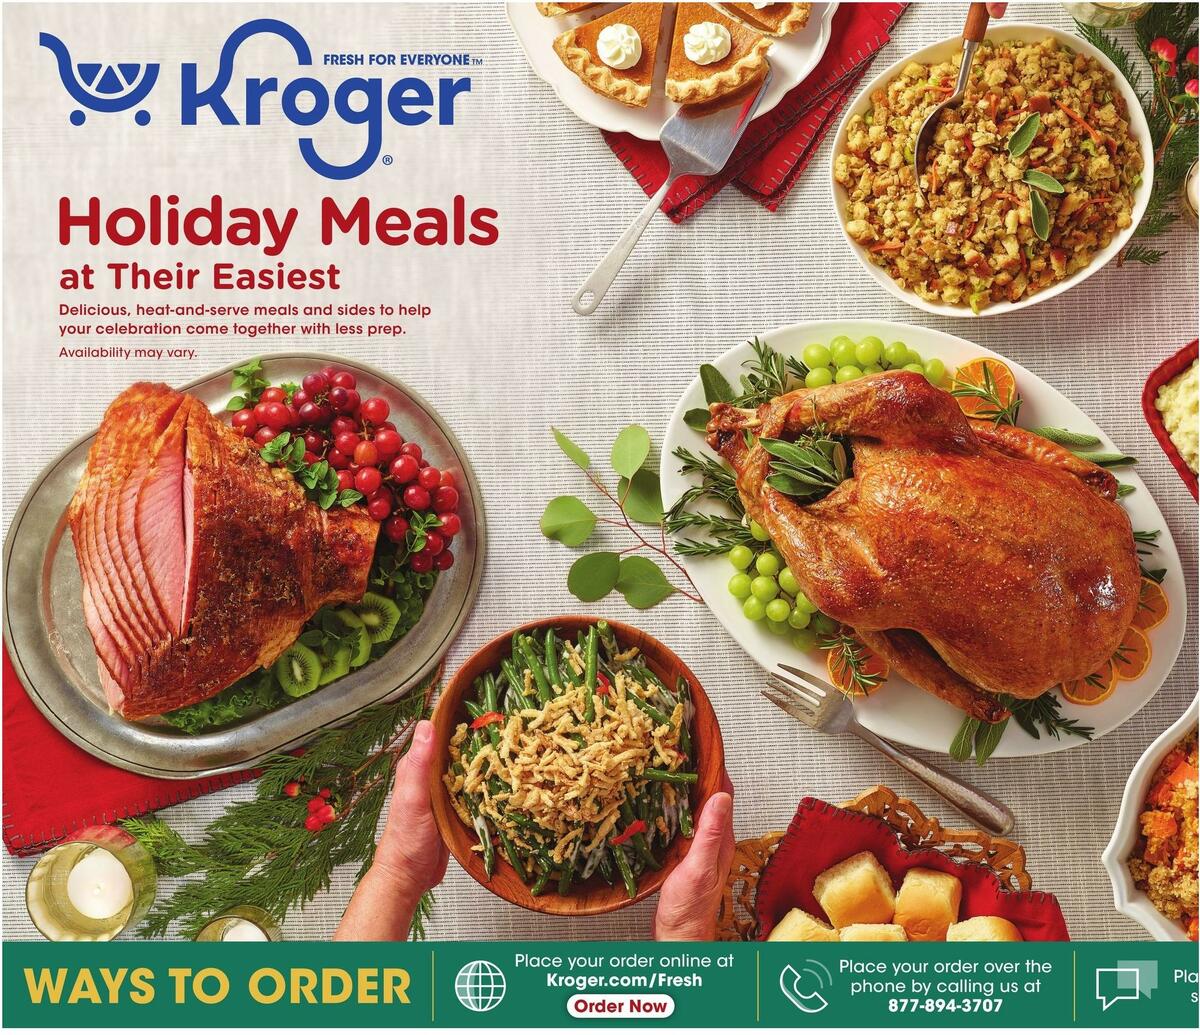 Kroger Holiday Meals Weekly Ads & Special Buys from November 3